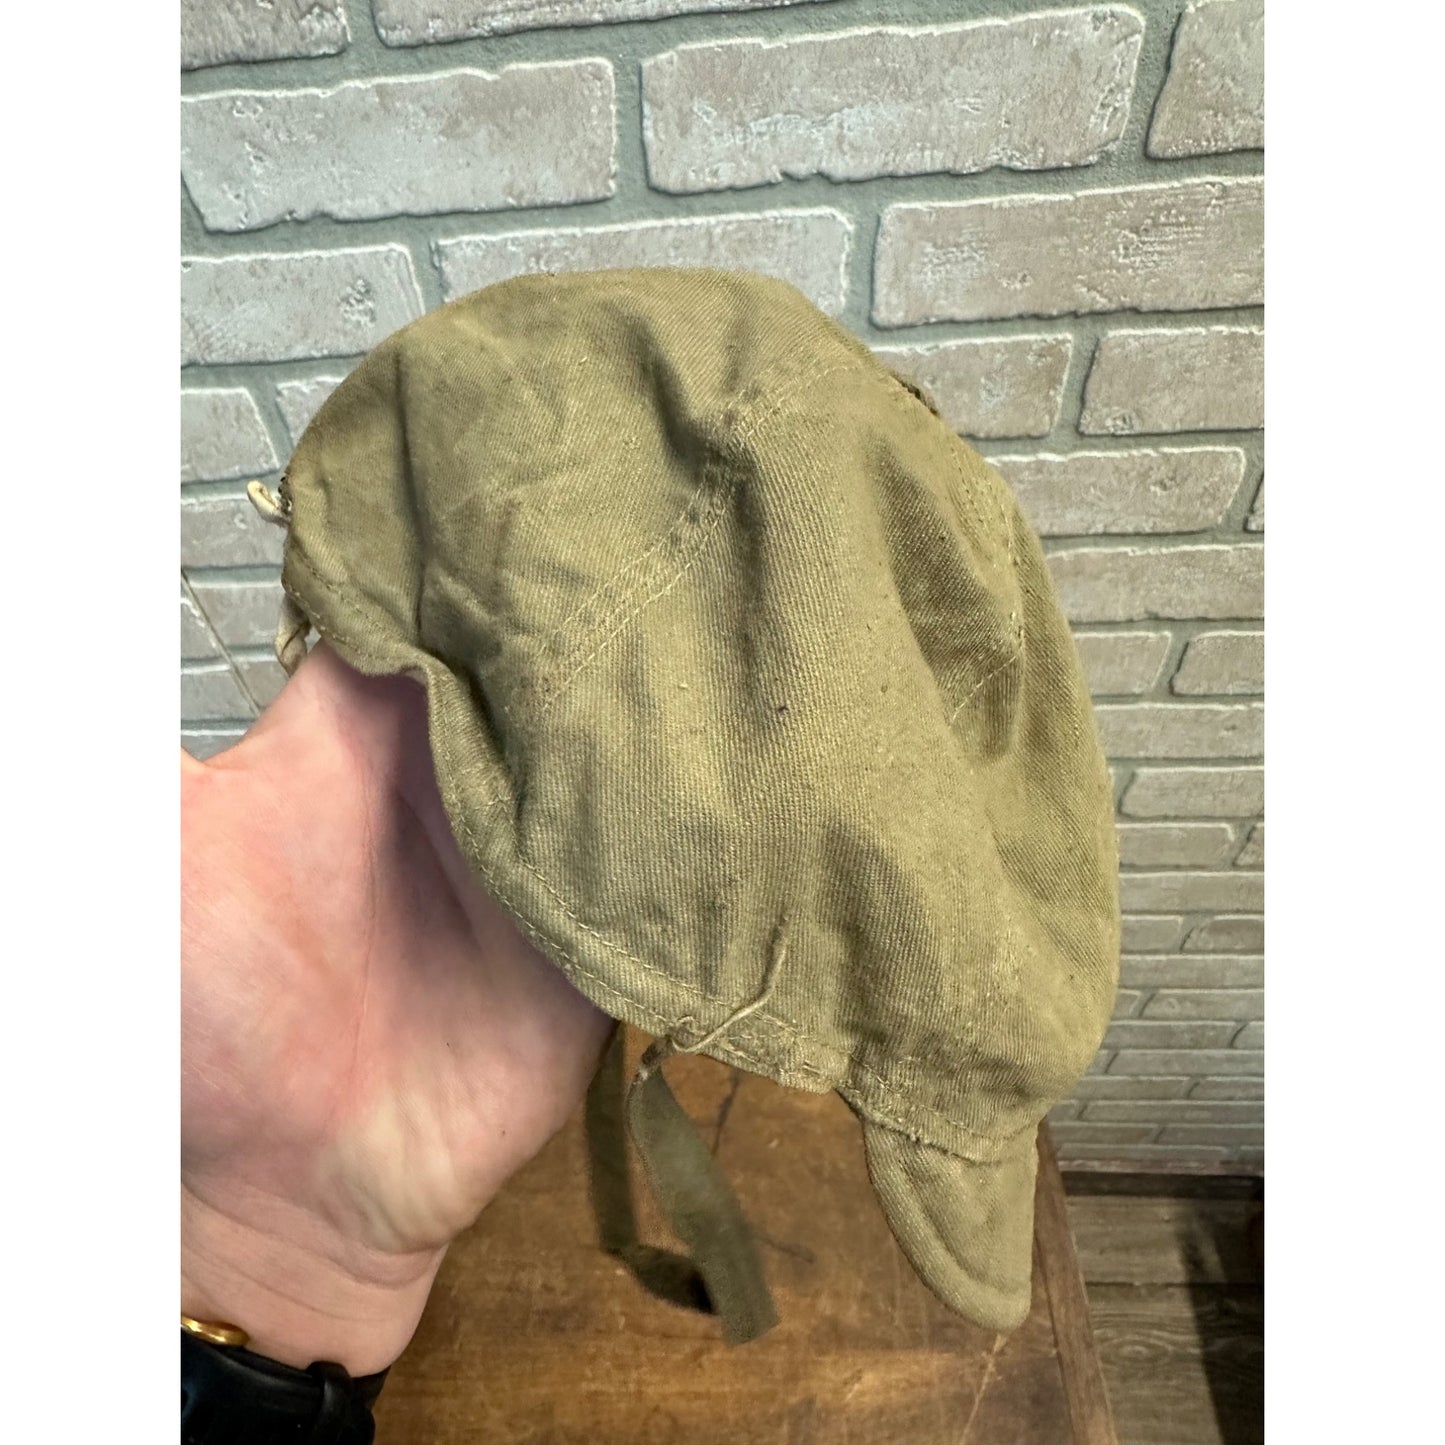 Vintage Child's Olive Drab Green Cap Hat w/ Stitched Star - Girl Scouts?